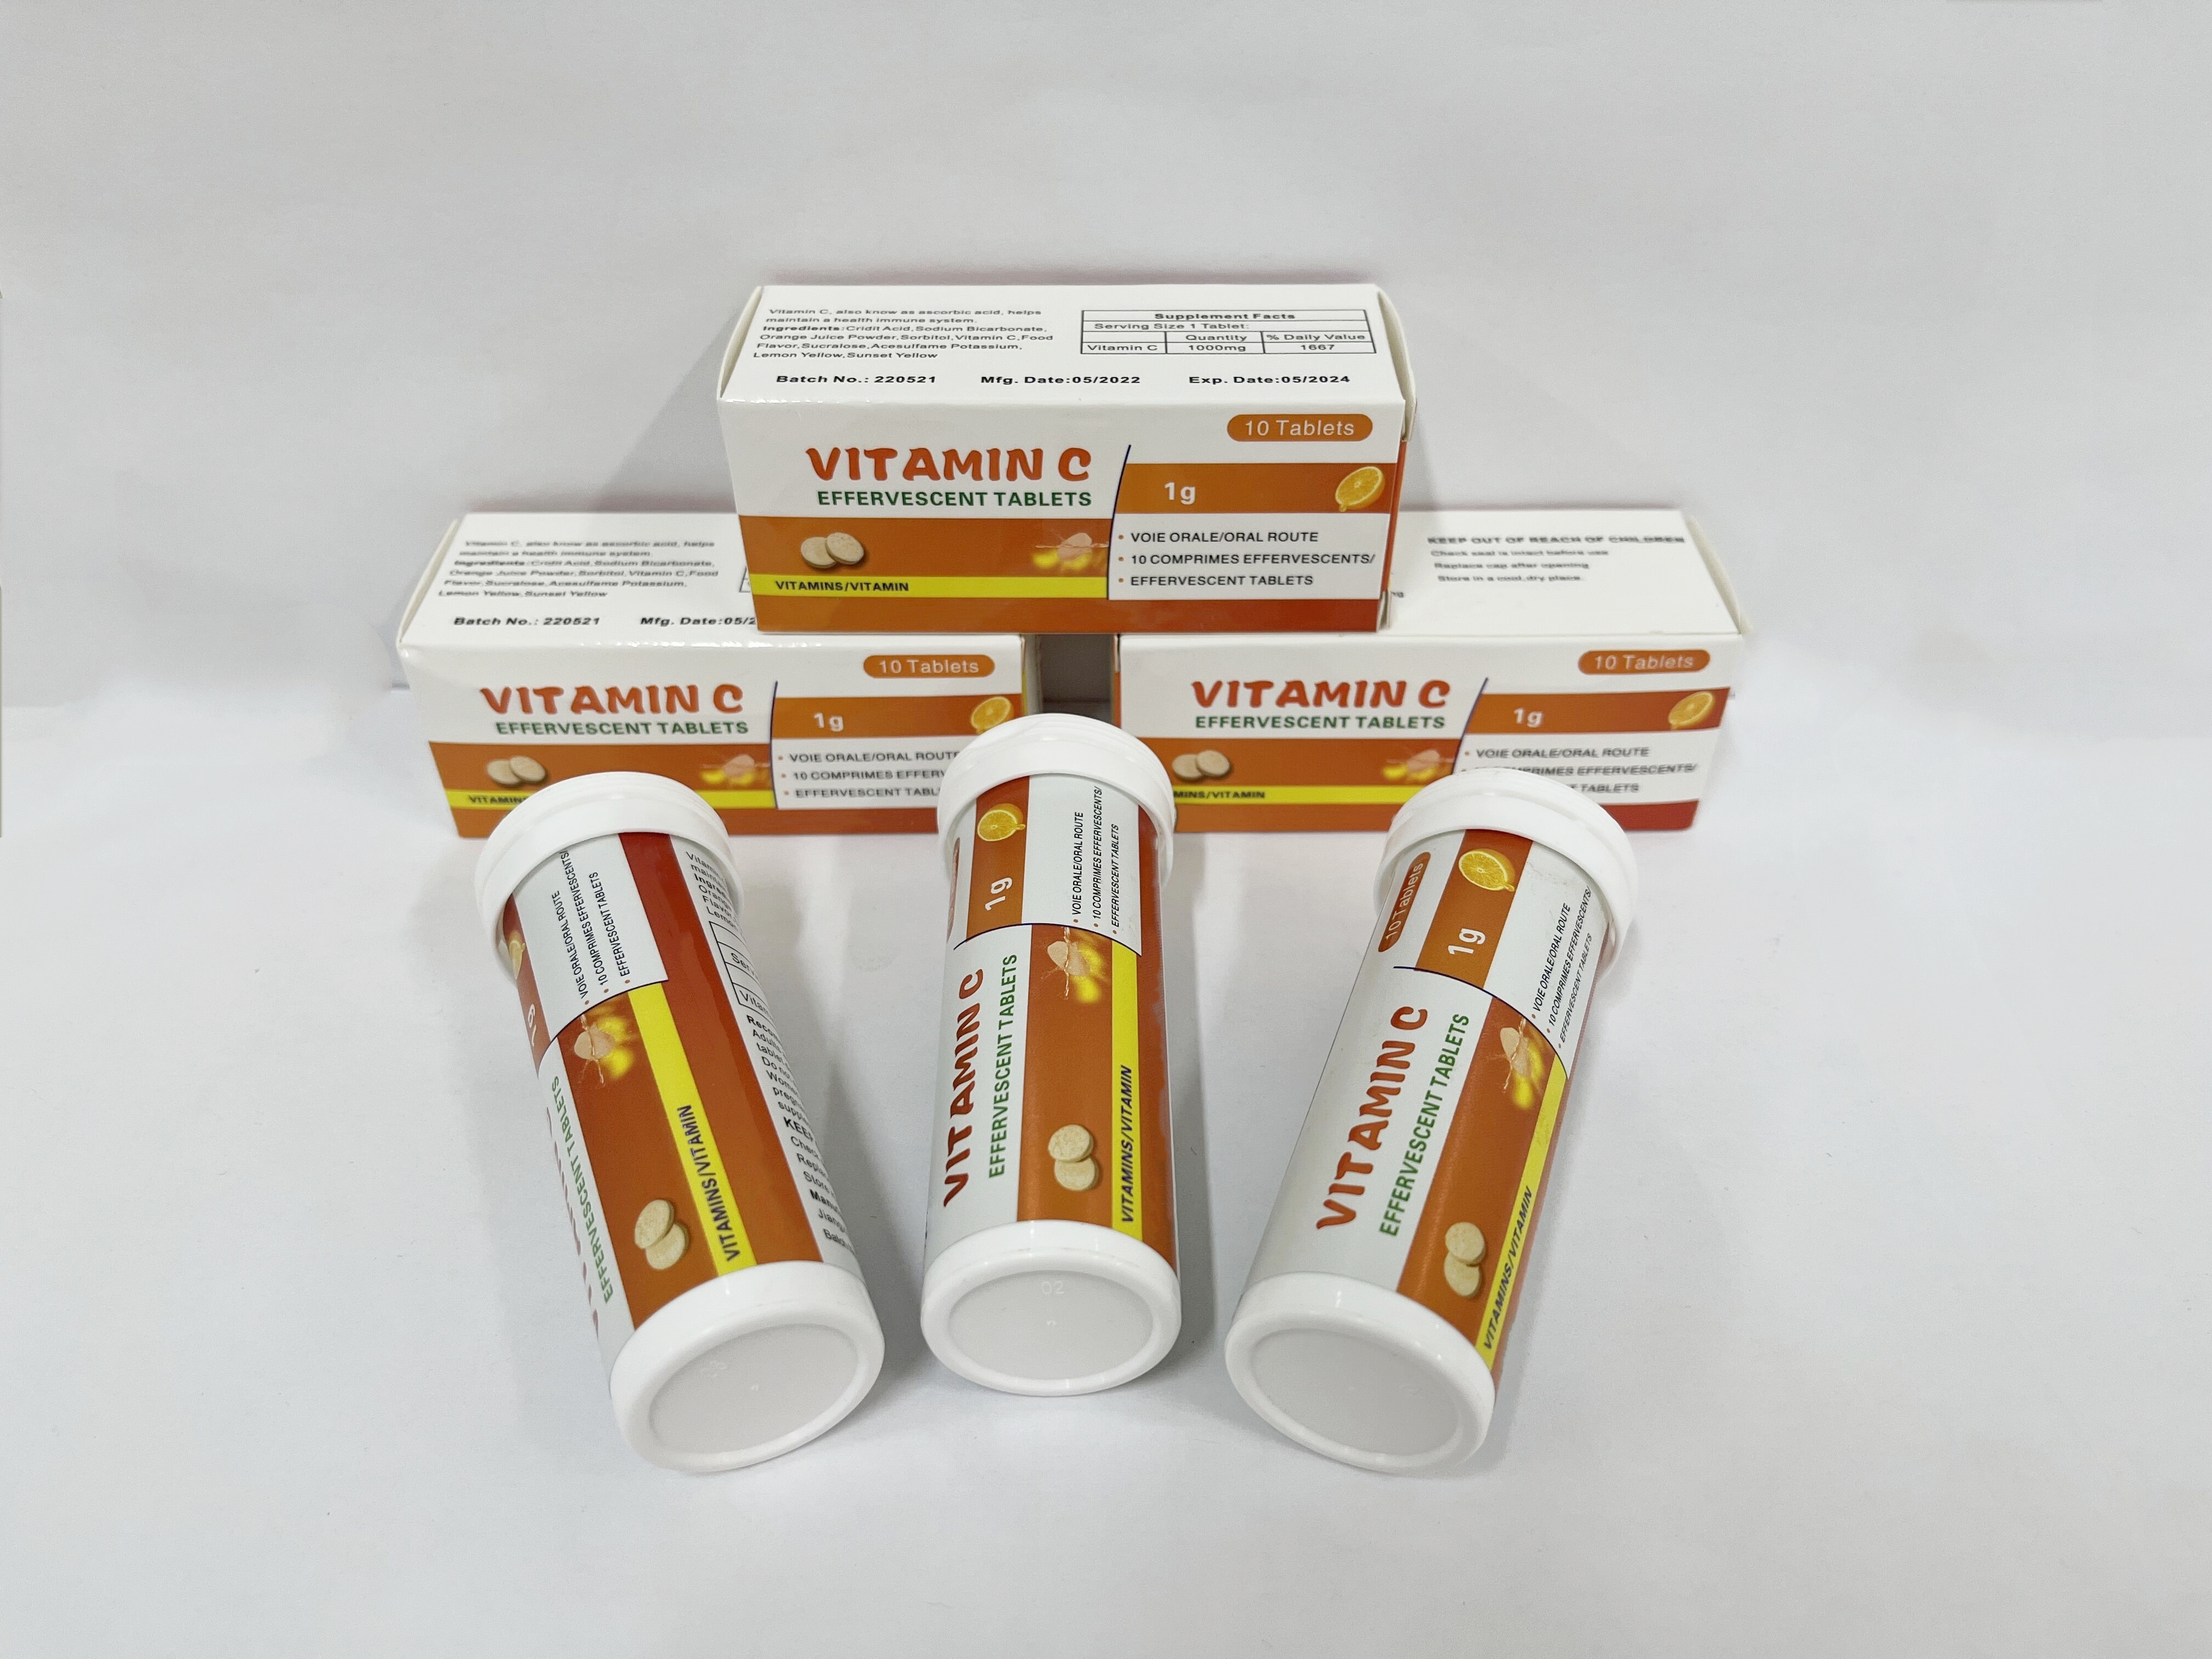 Vitamin C Effervescent Tablets 1g Featured Image